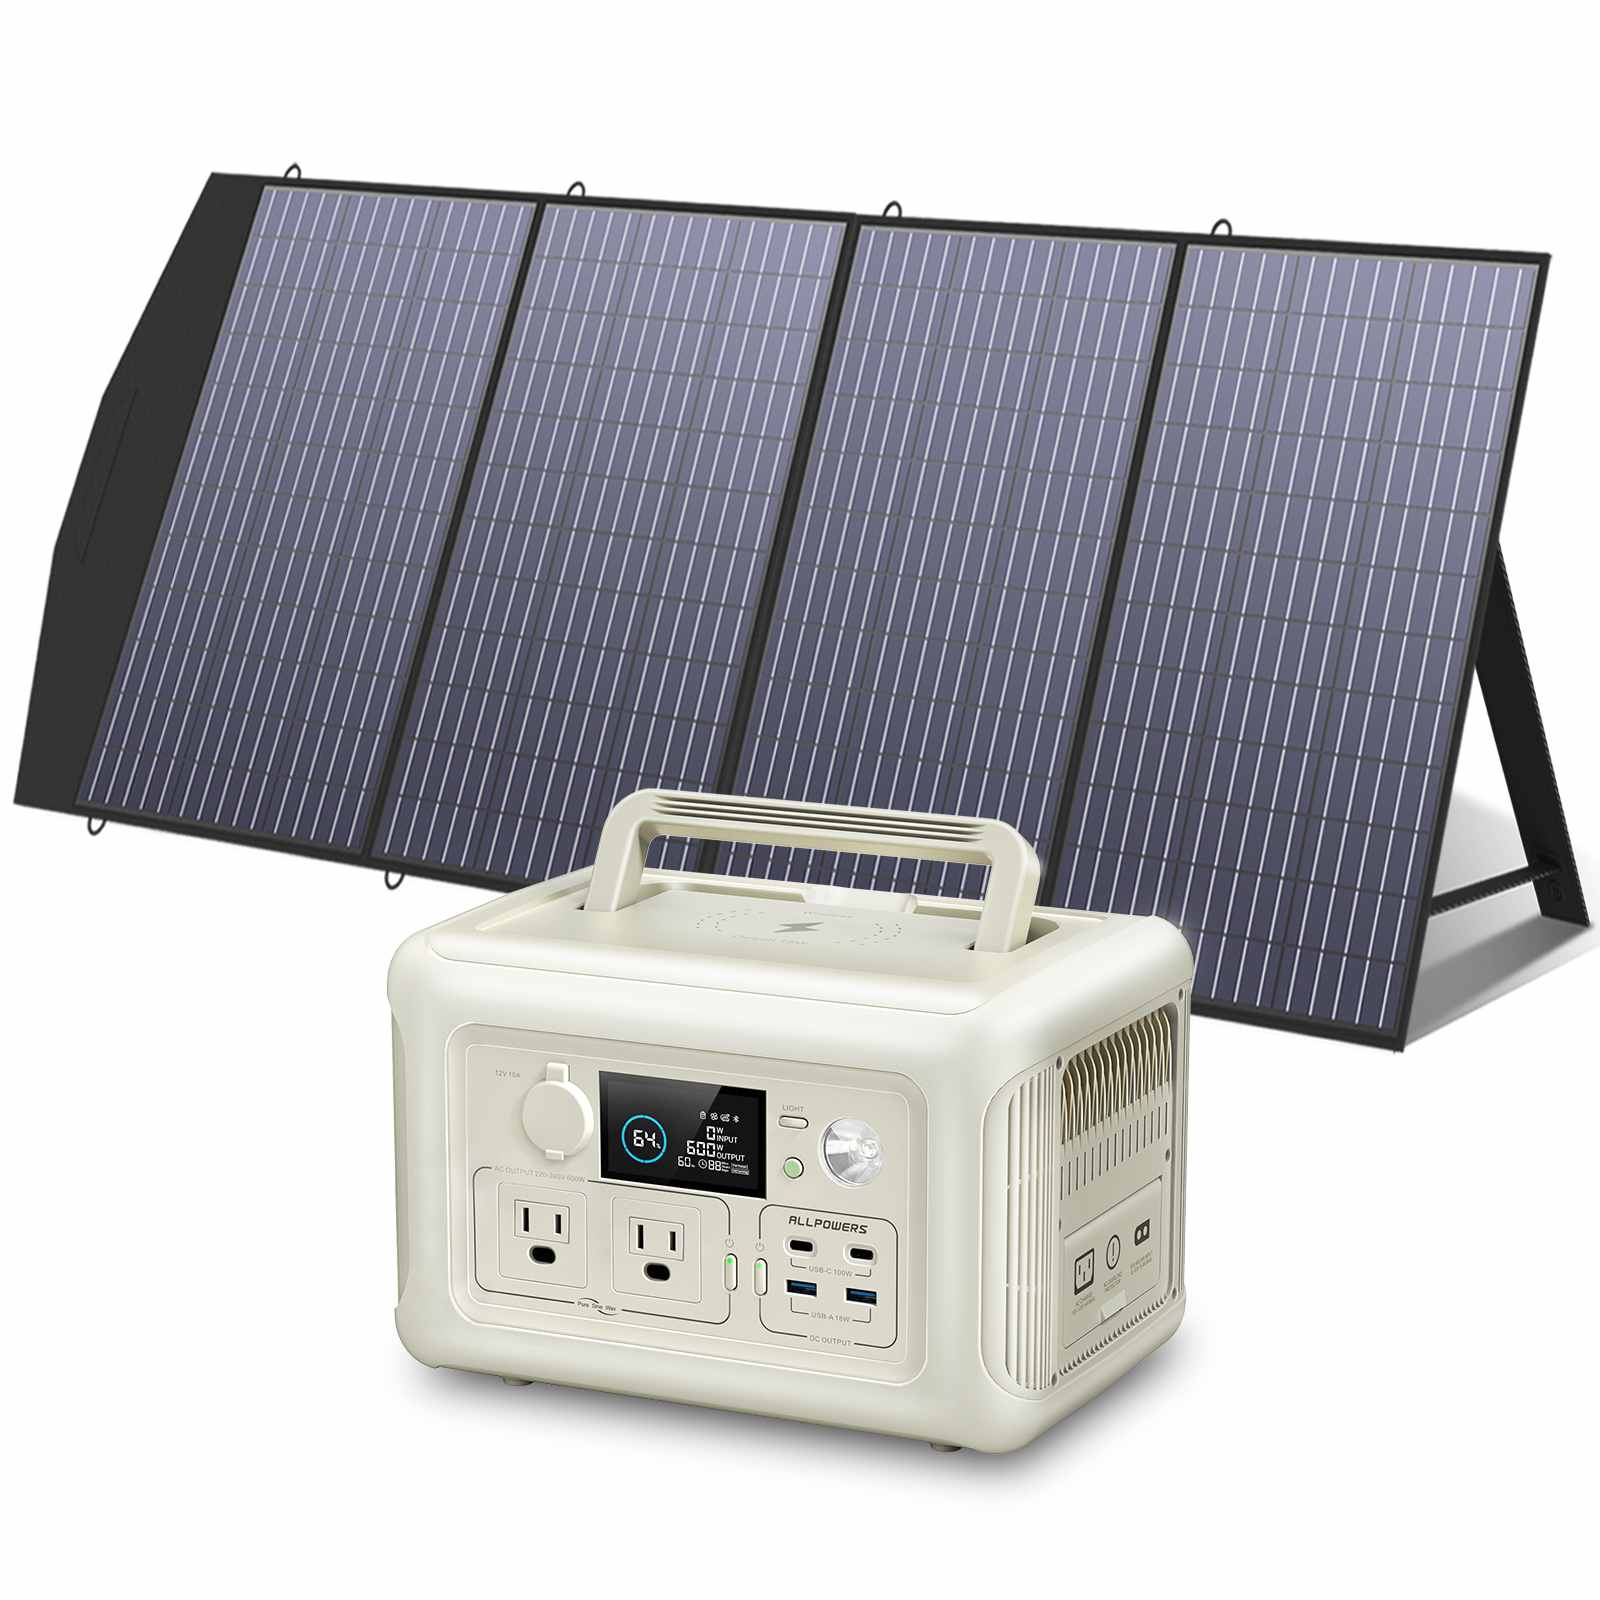 ALLPOWERS R600 Solar Generator 600W Portable Power Station 299Wh with Solar Panels